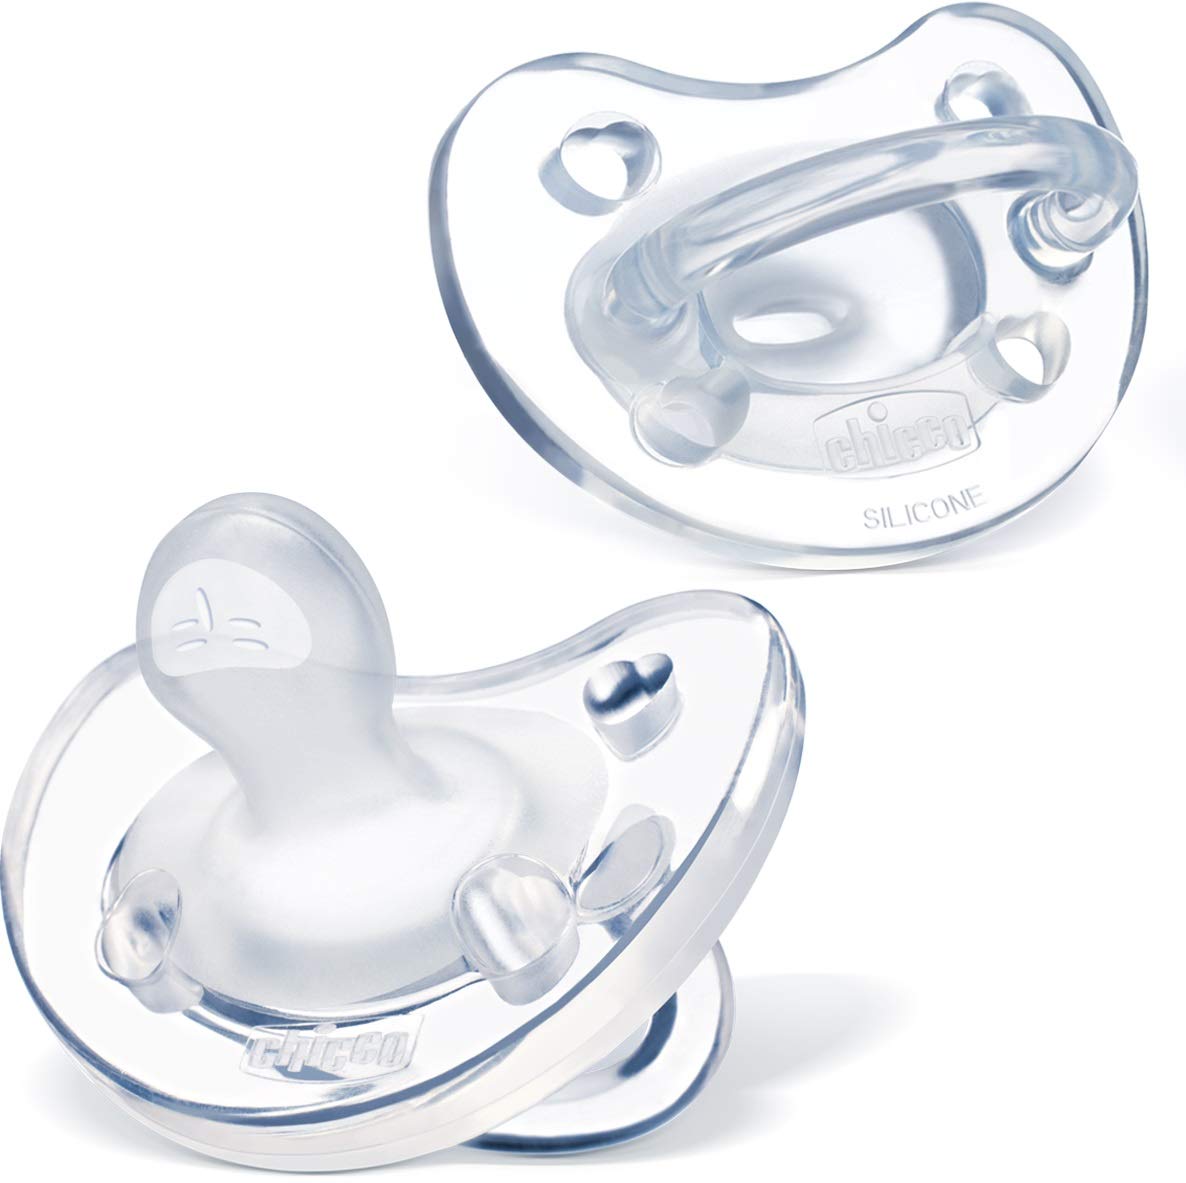 Detail Image Of Baby Pacifier Nomer 8